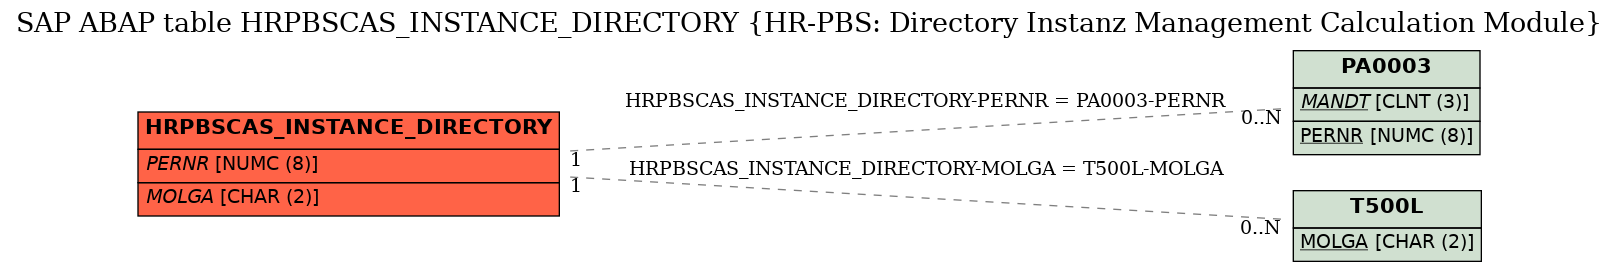 E-R Diagram for table HRPBSCAS_INSTANCE_DIRECTORY (HR-PBS: Directory Instanz Management Calculation Module)